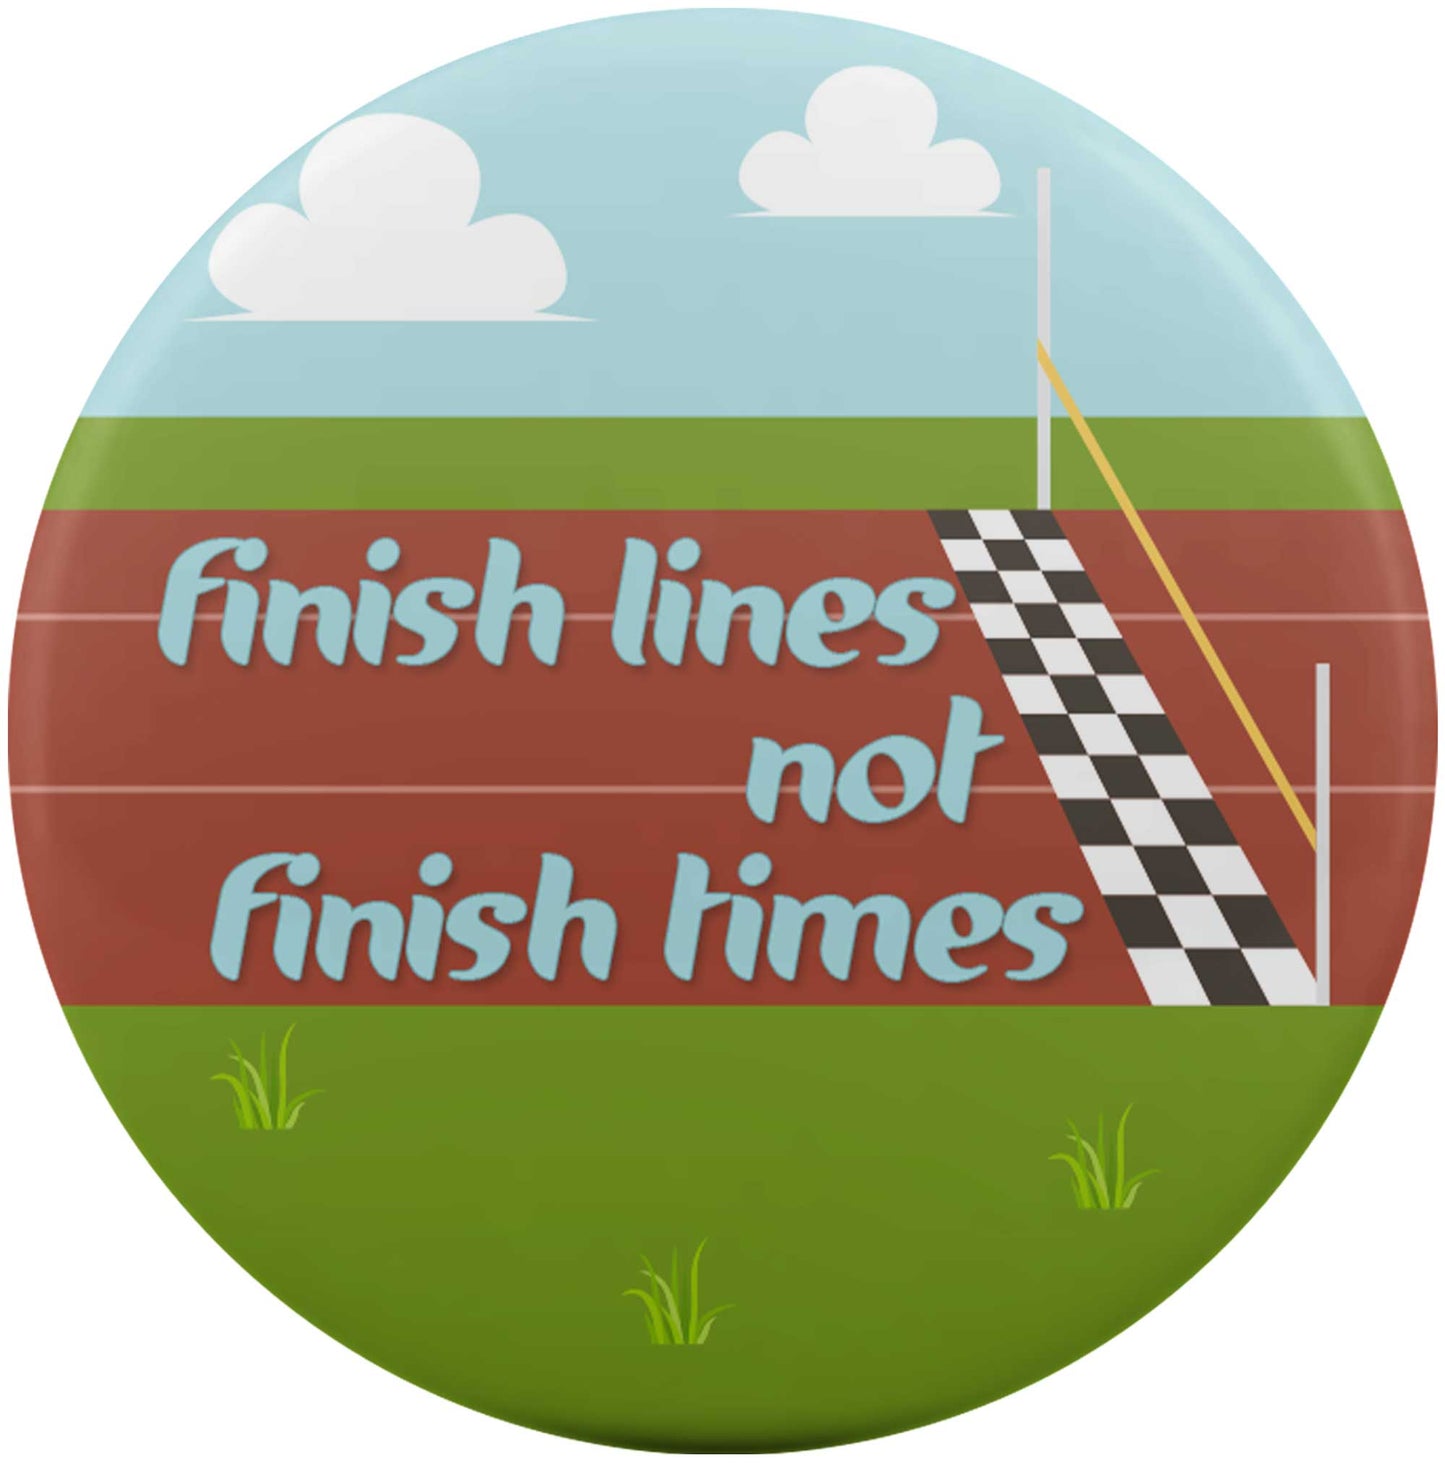 Finish Lines, Not Finish Times